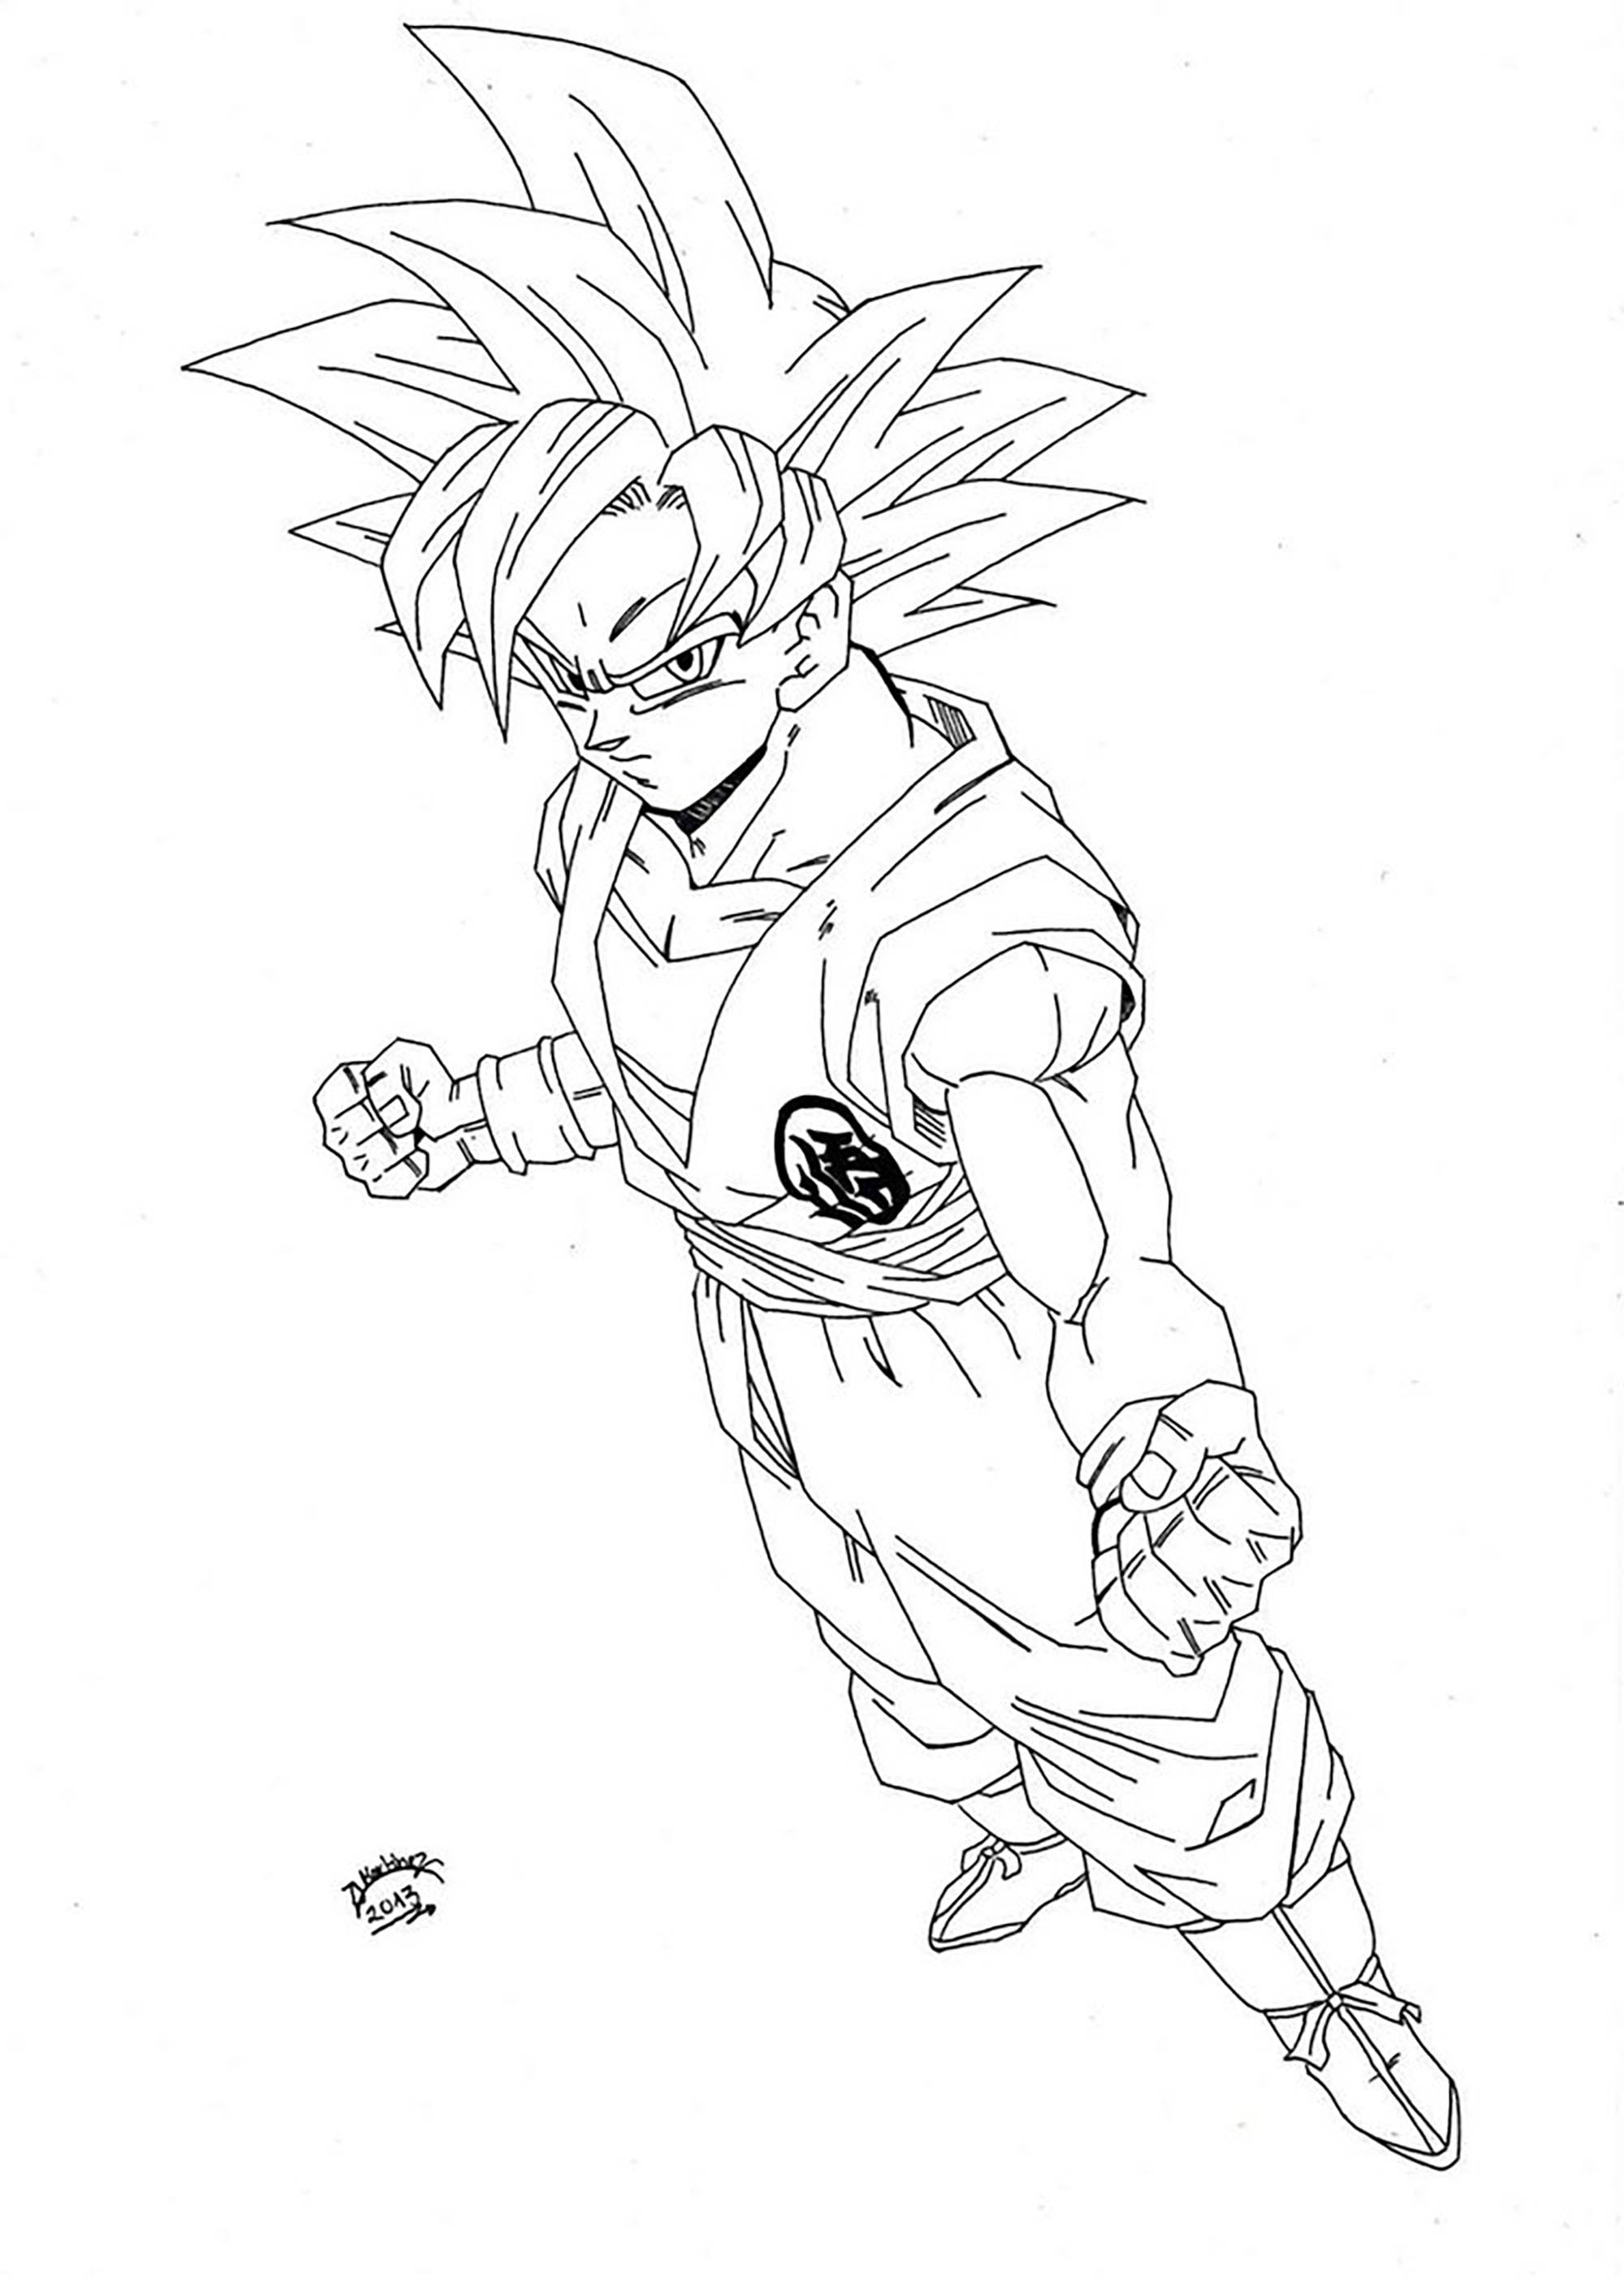 Beautiful Dragon Ball Z coloring page to print and color : Songoku